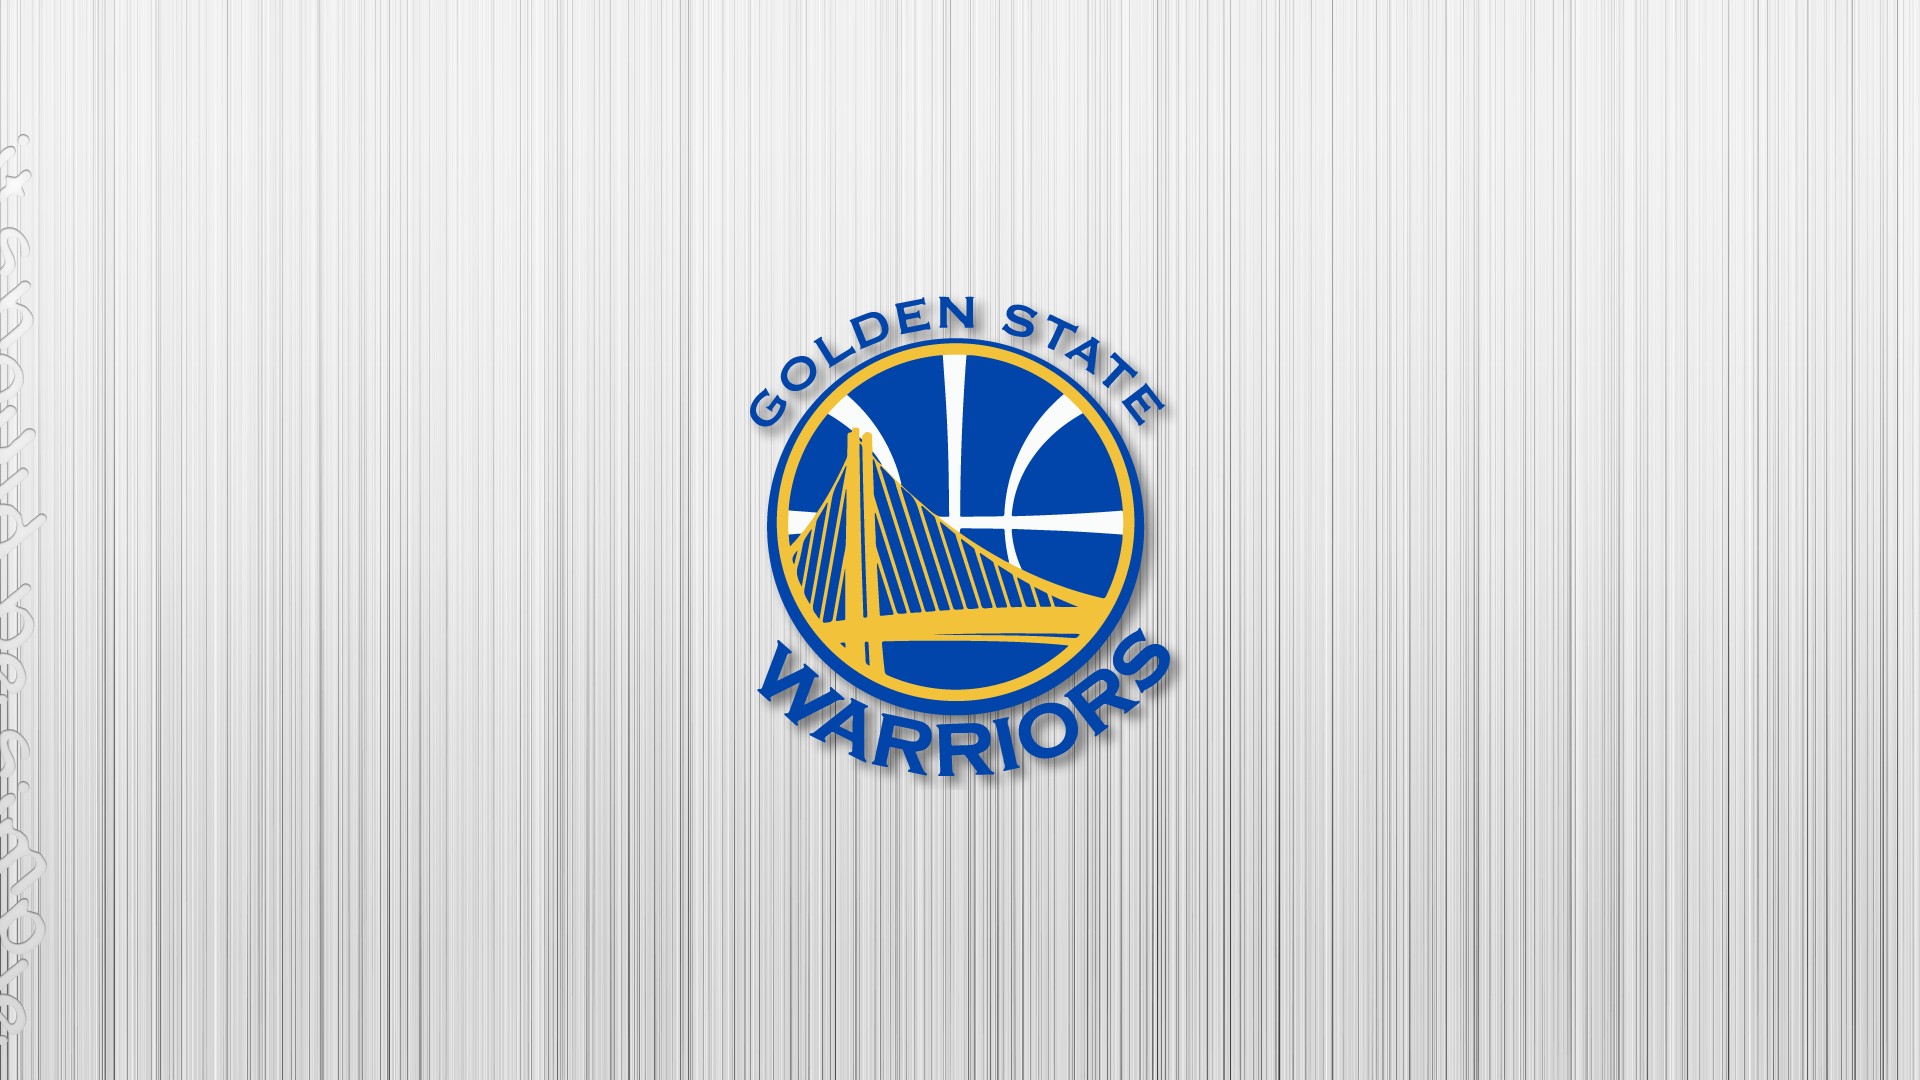 Golden State Warriors NBA HD Wallpapers with image dimensions 1920x1080 pixel. You can make this wallpaper for your Desktop Computer Backgrounds, Windows or Mac Screensavers, iPhone Lock screen, Tablet or Android and another Mobile Phone device